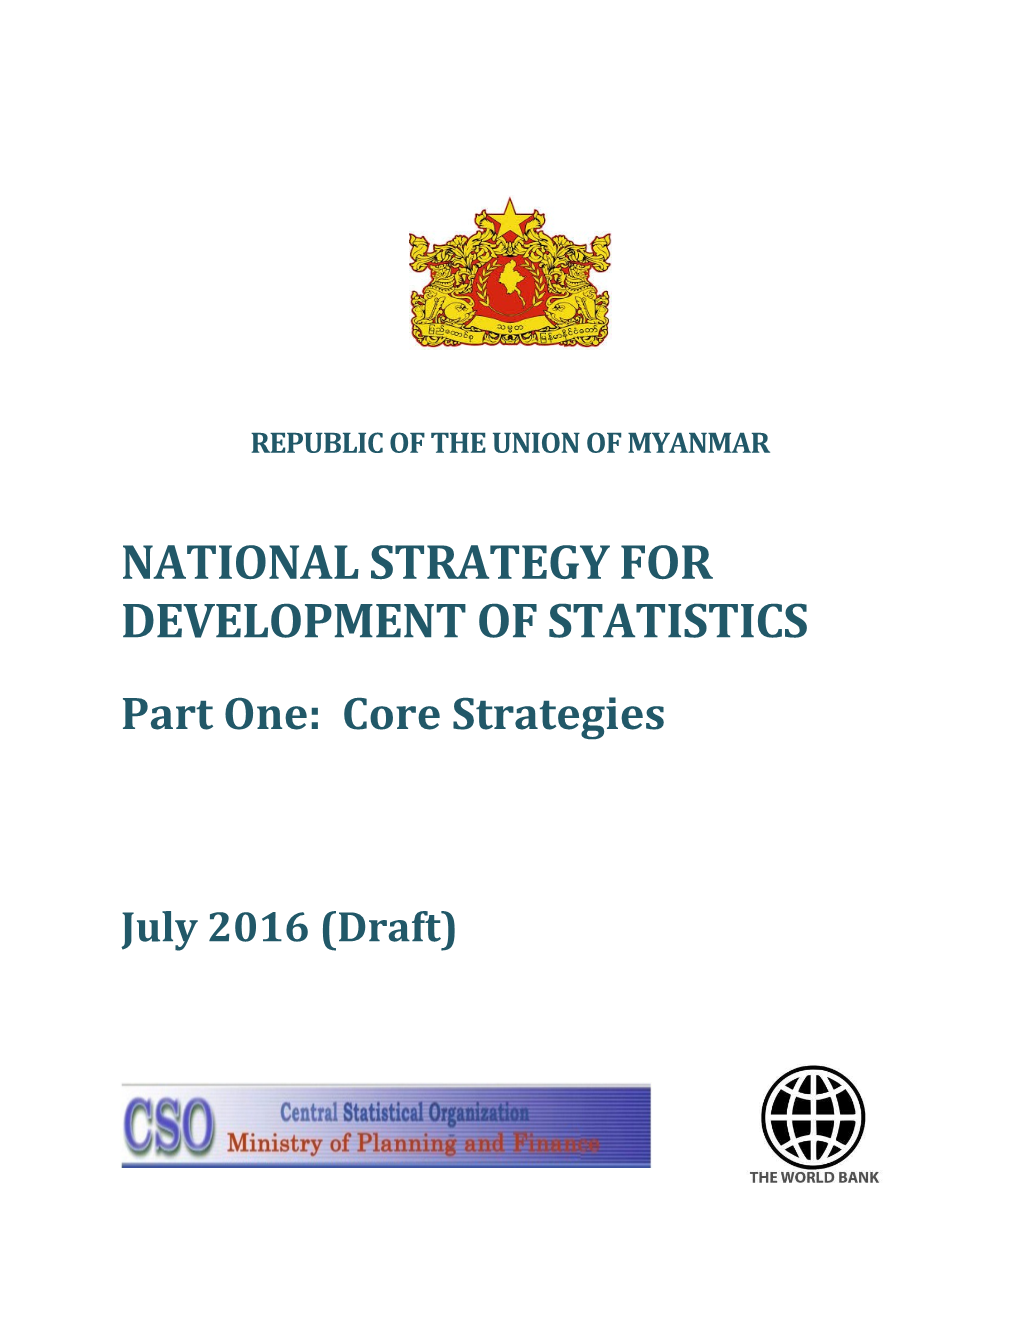 National Strategy for Development of Statistics